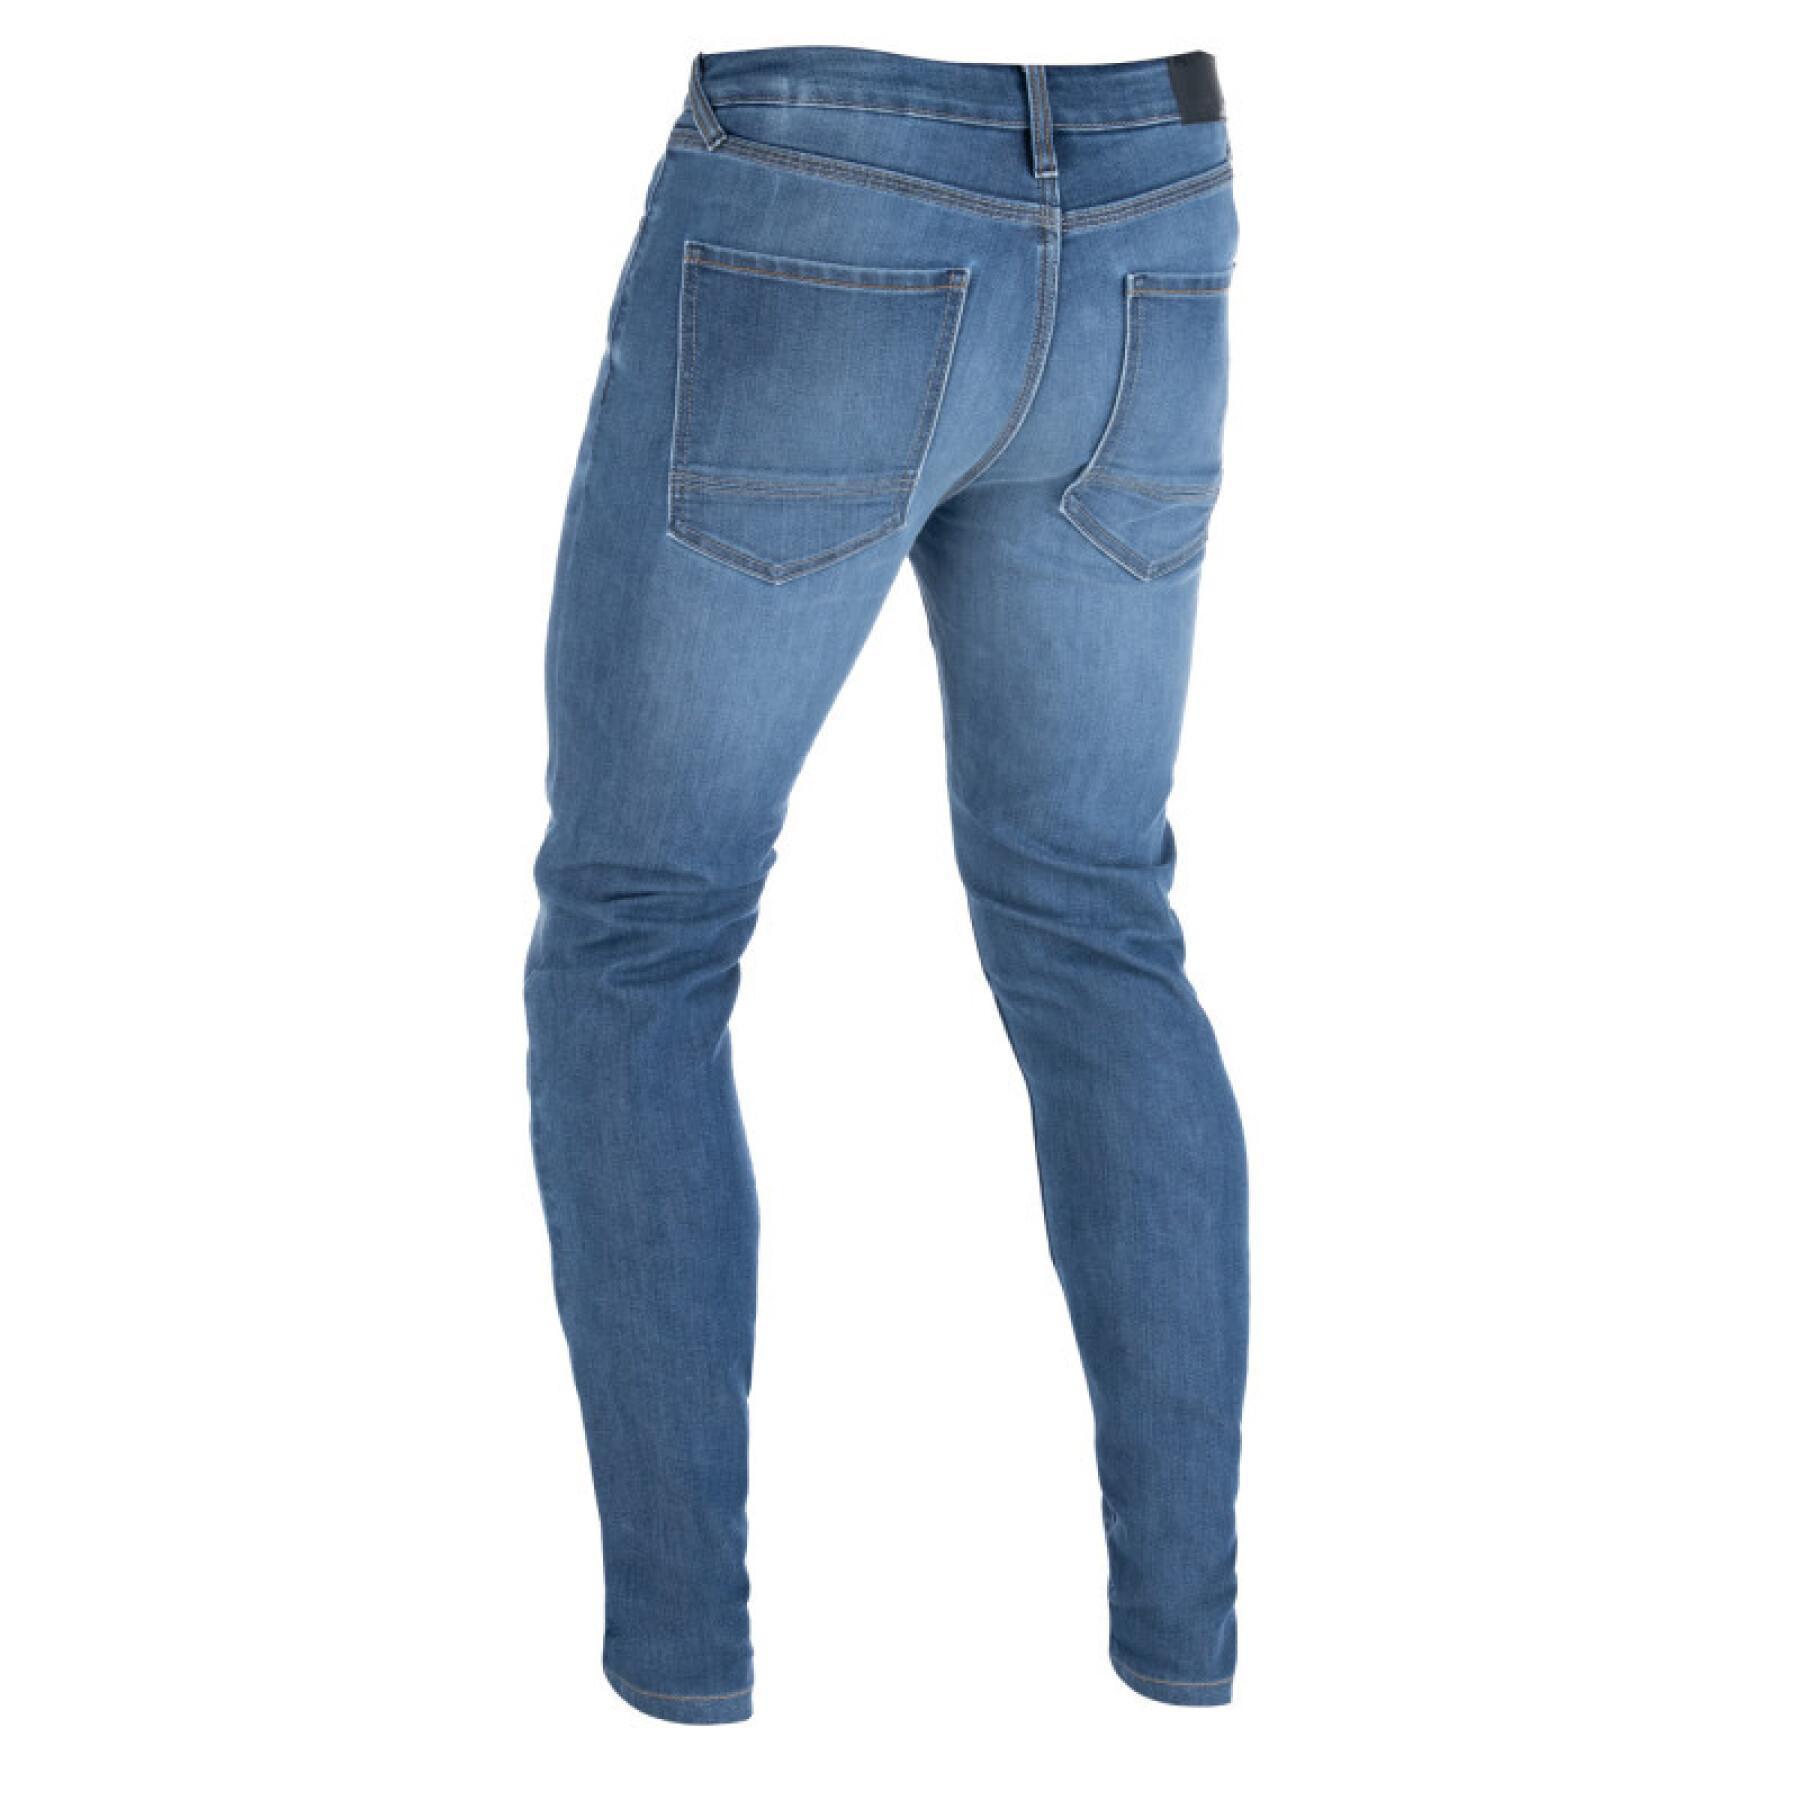 Slim-fit motorcycle jeans Oxford Original Approved AA Dynamic